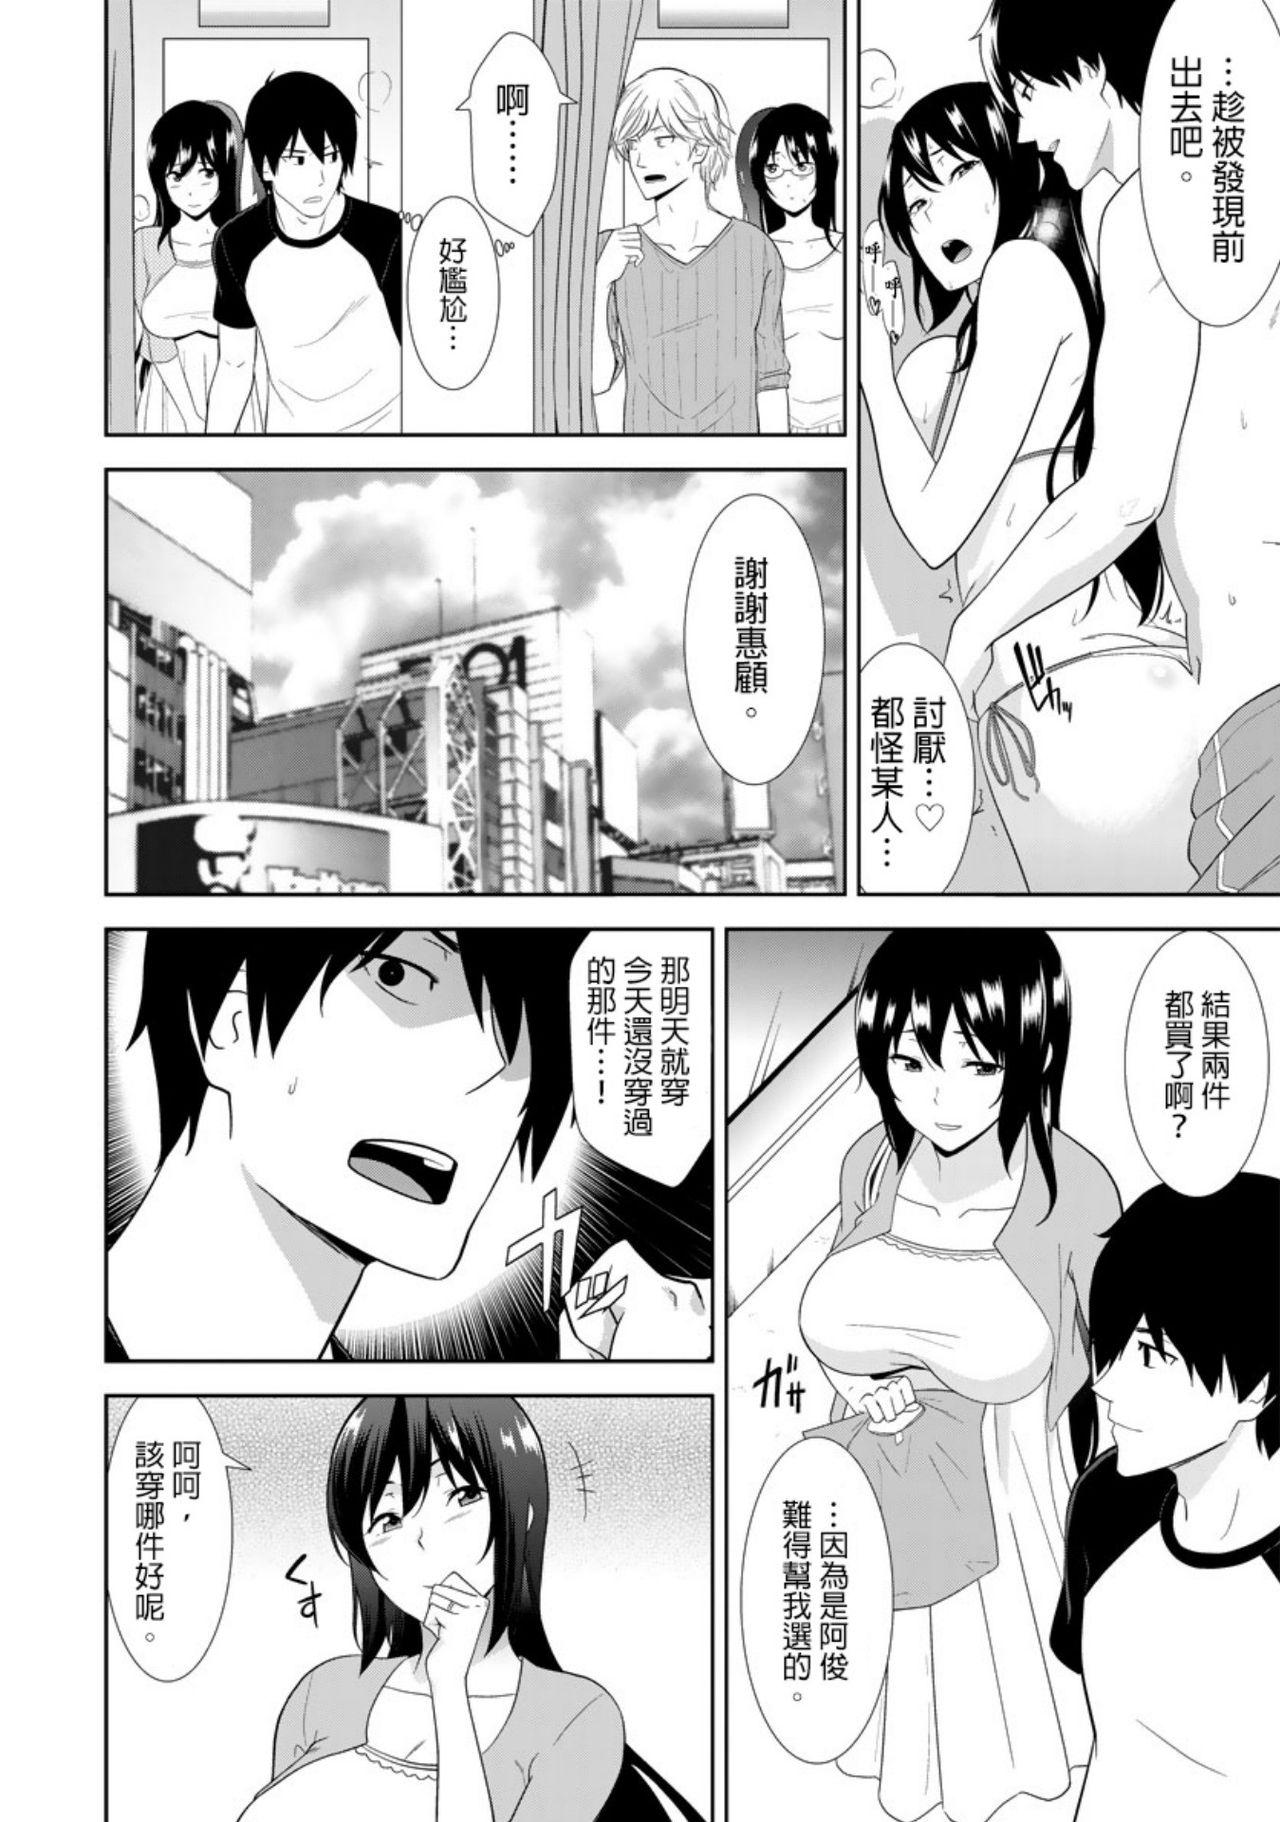 Lez Fuck 教え子に襲ワレル人妻は抵抗できなくて Ch.7 8teen - Page 25